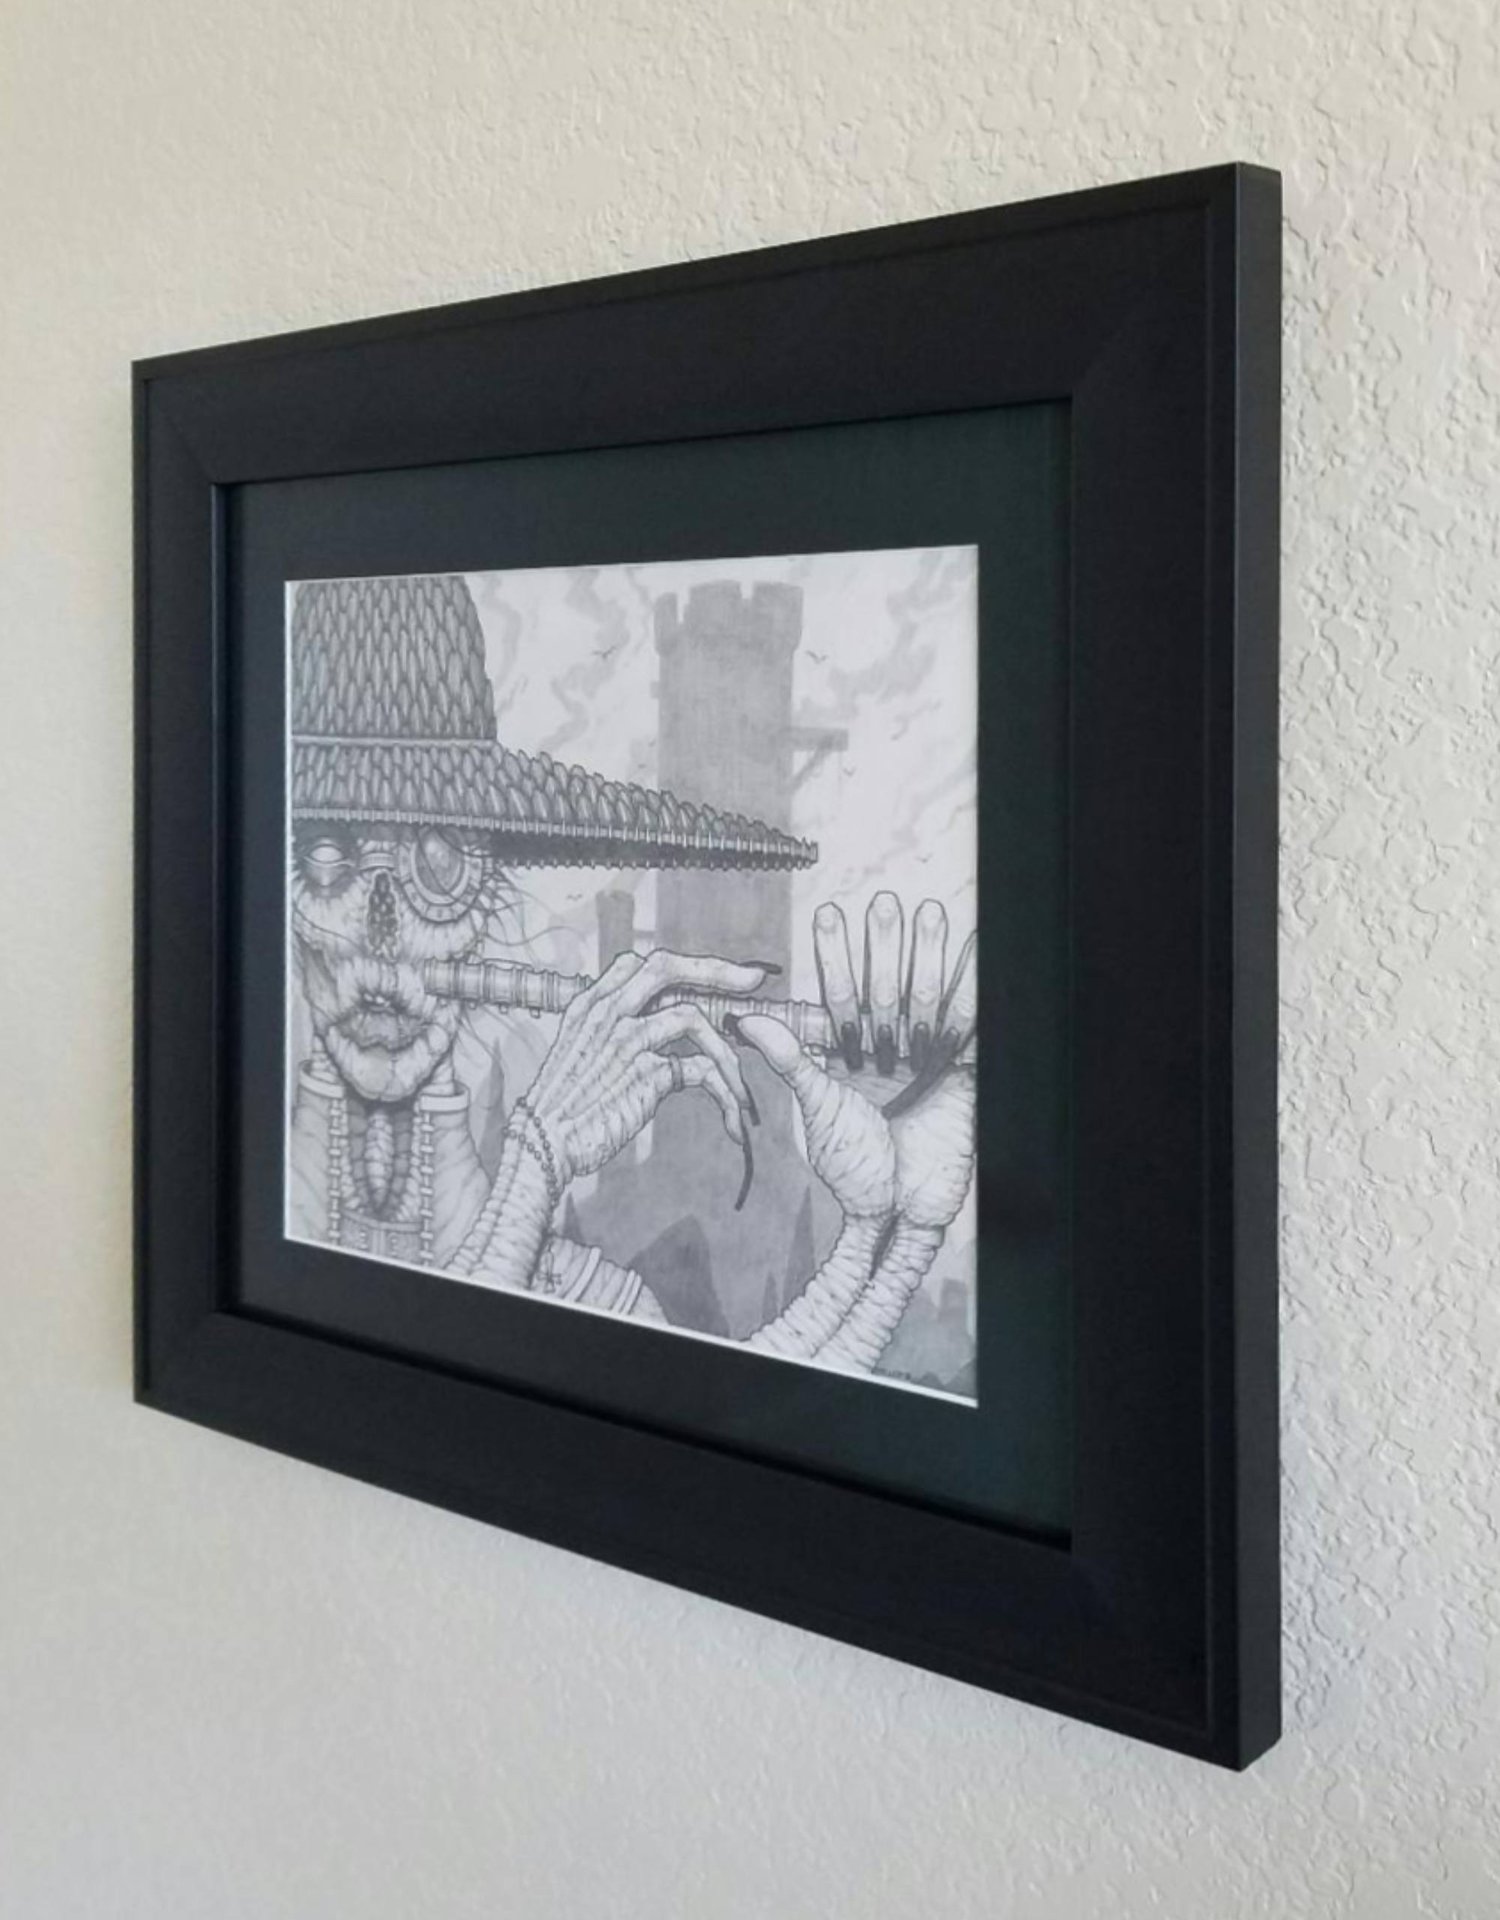 Image of Pay the Piper - Framed Original Graphite